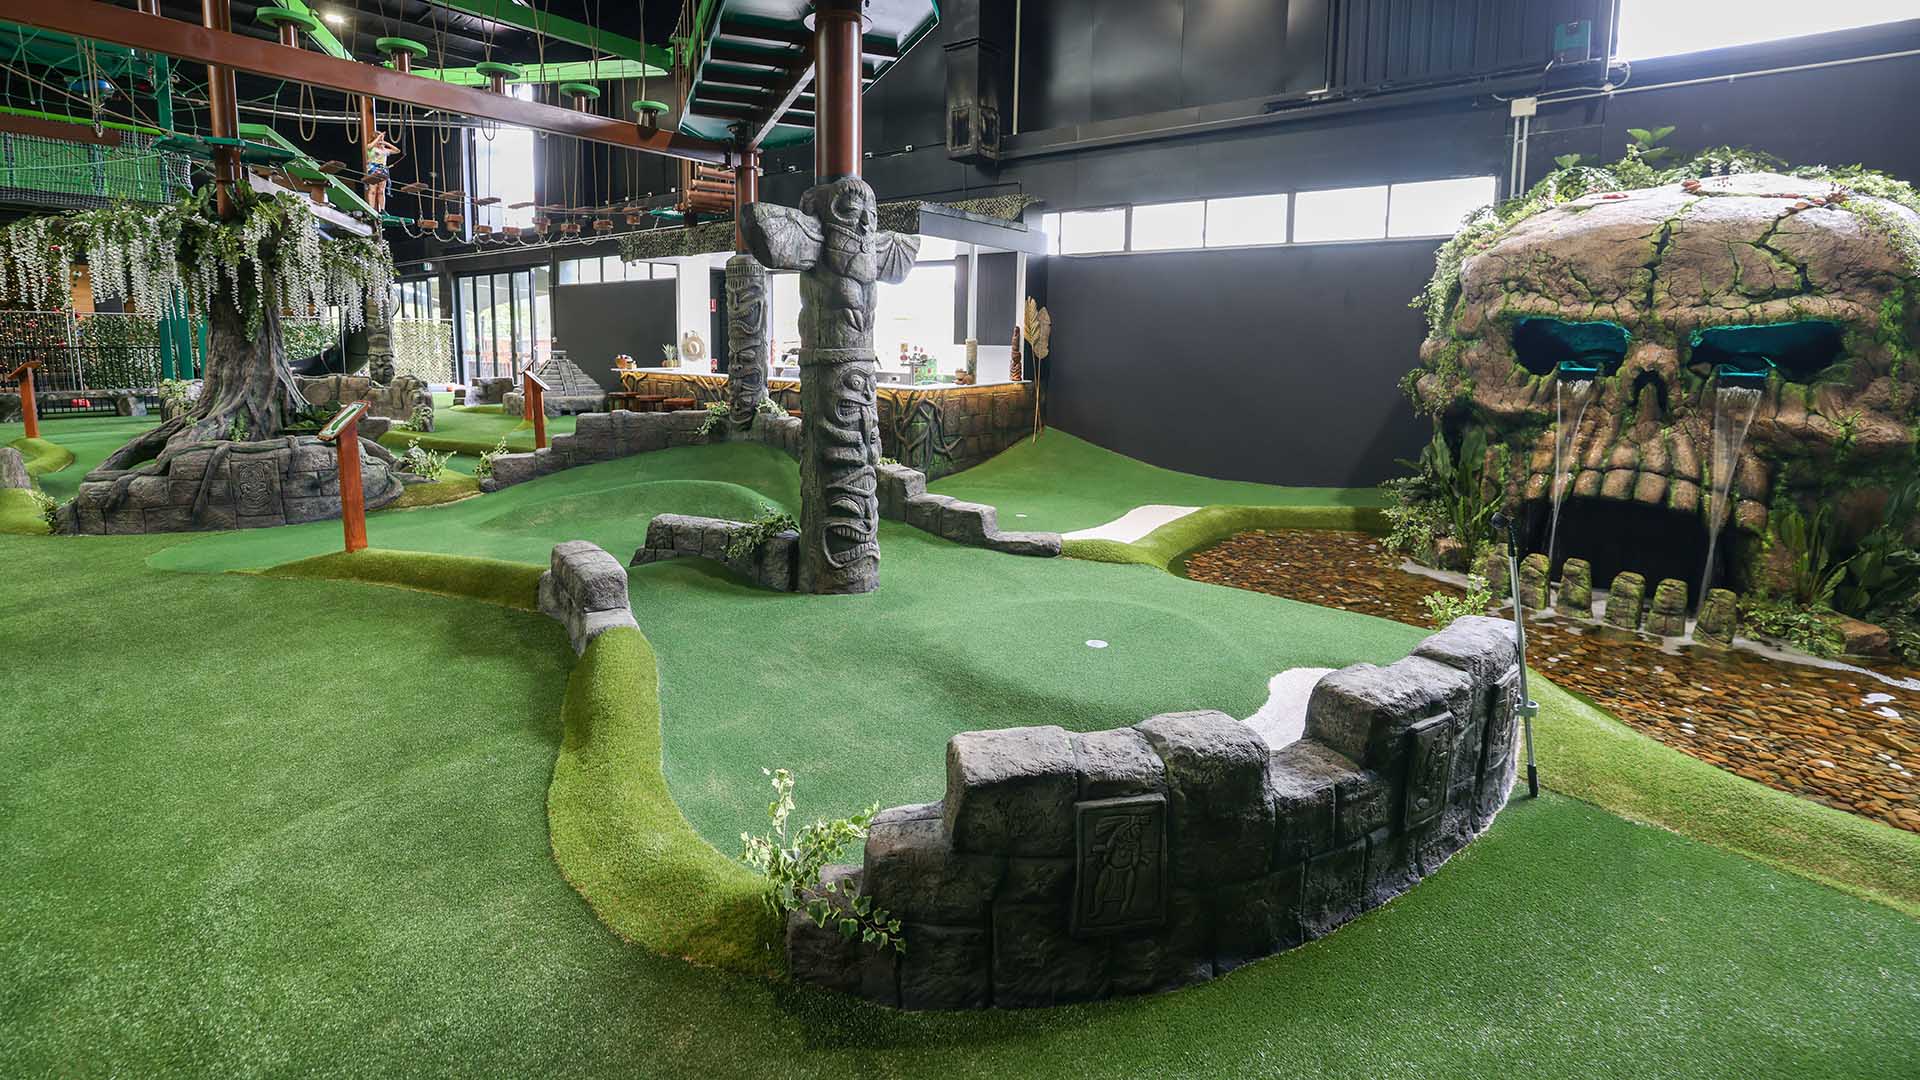 Brisbane's East Just Scored a New 16-Hole Jungle-Themed Mini Golf Course with a Cocktail Bar